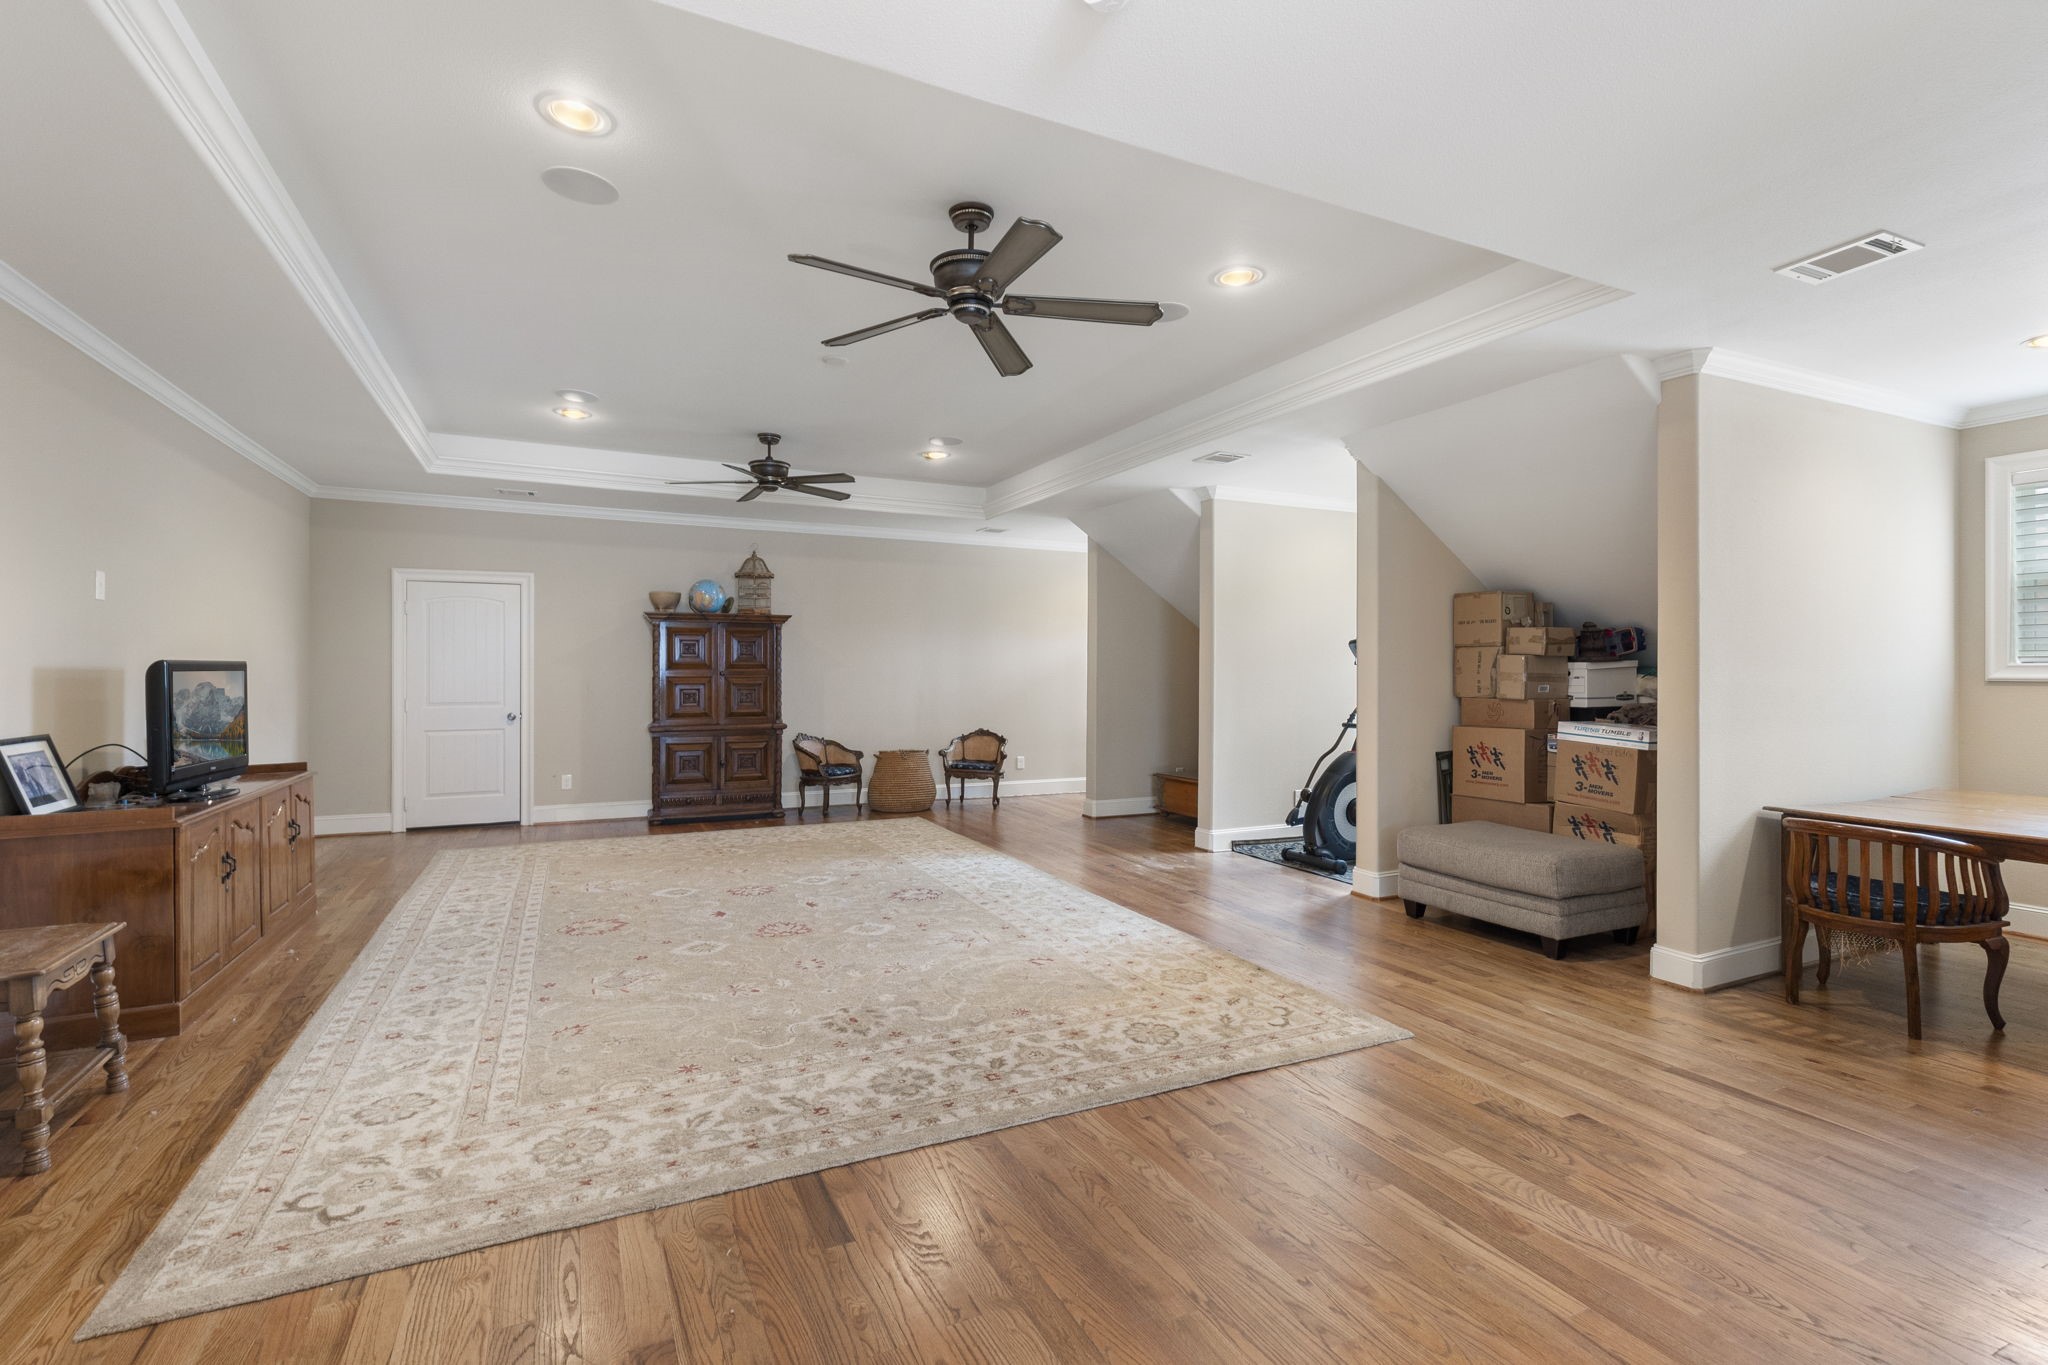 Huge game room has 3 dormer windows and 2 other spaces that allow for versatility if future redesign for multiple rooms.  Think separate media room, extra bedroom, home school with study nooks, or continue to enjoy the wide open spaces.